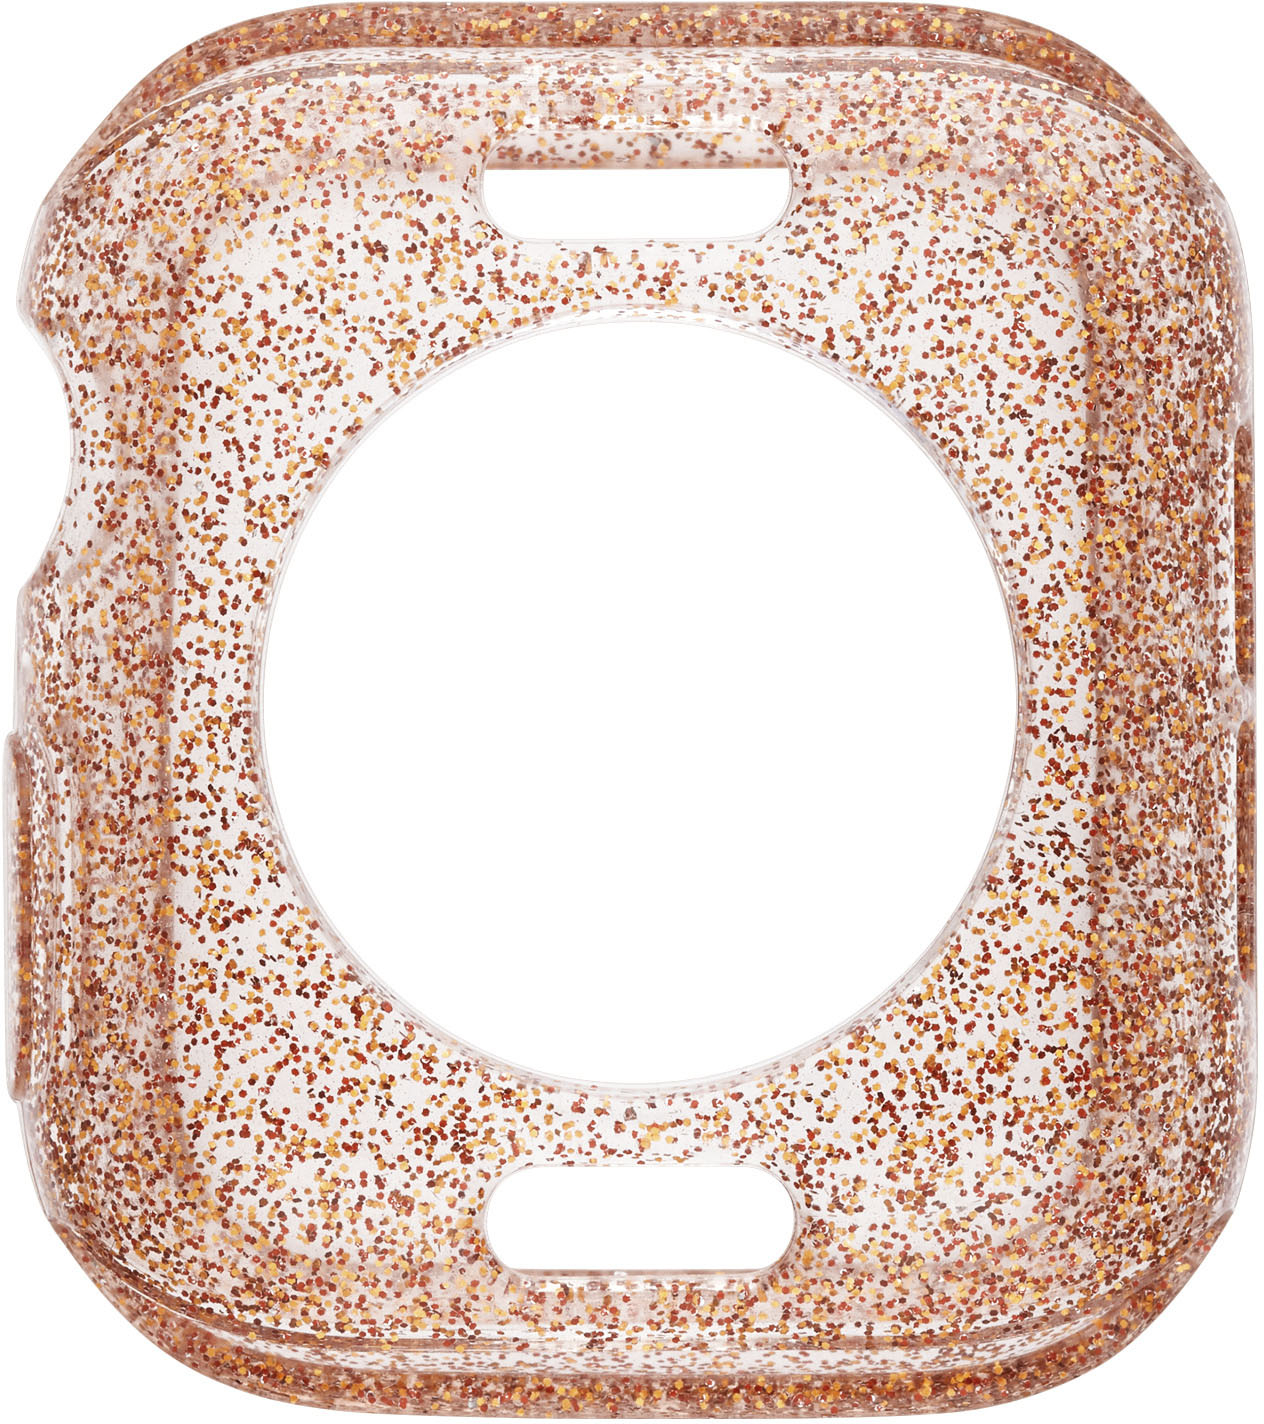 Left View: kate spade new york - Protective Hardshell Case for Apple iPhone 12 mini - Island Leaf Pink Glitter